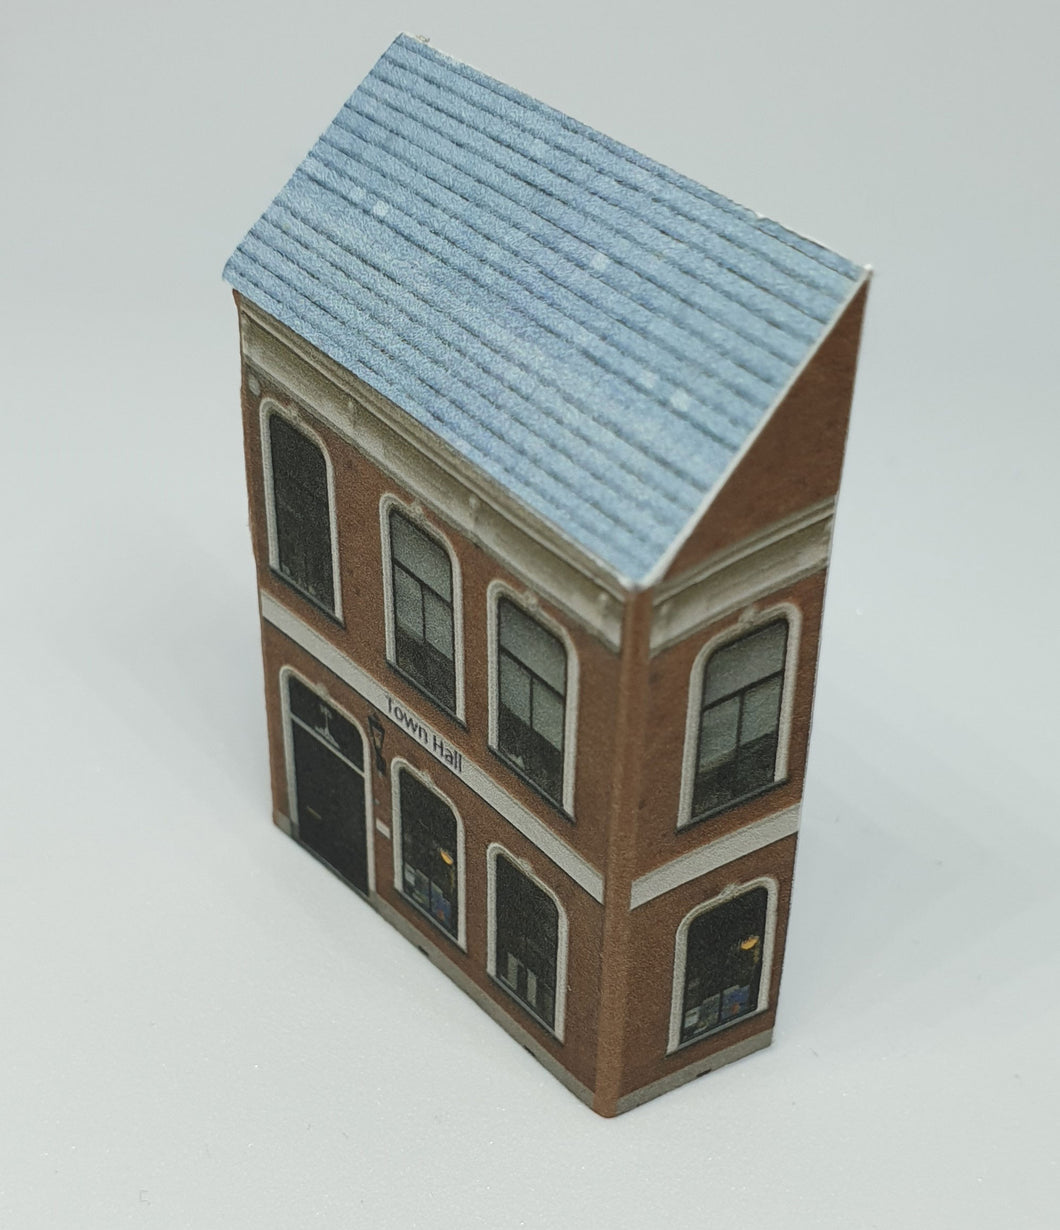 N Gauge low relief town hall viewed from the side